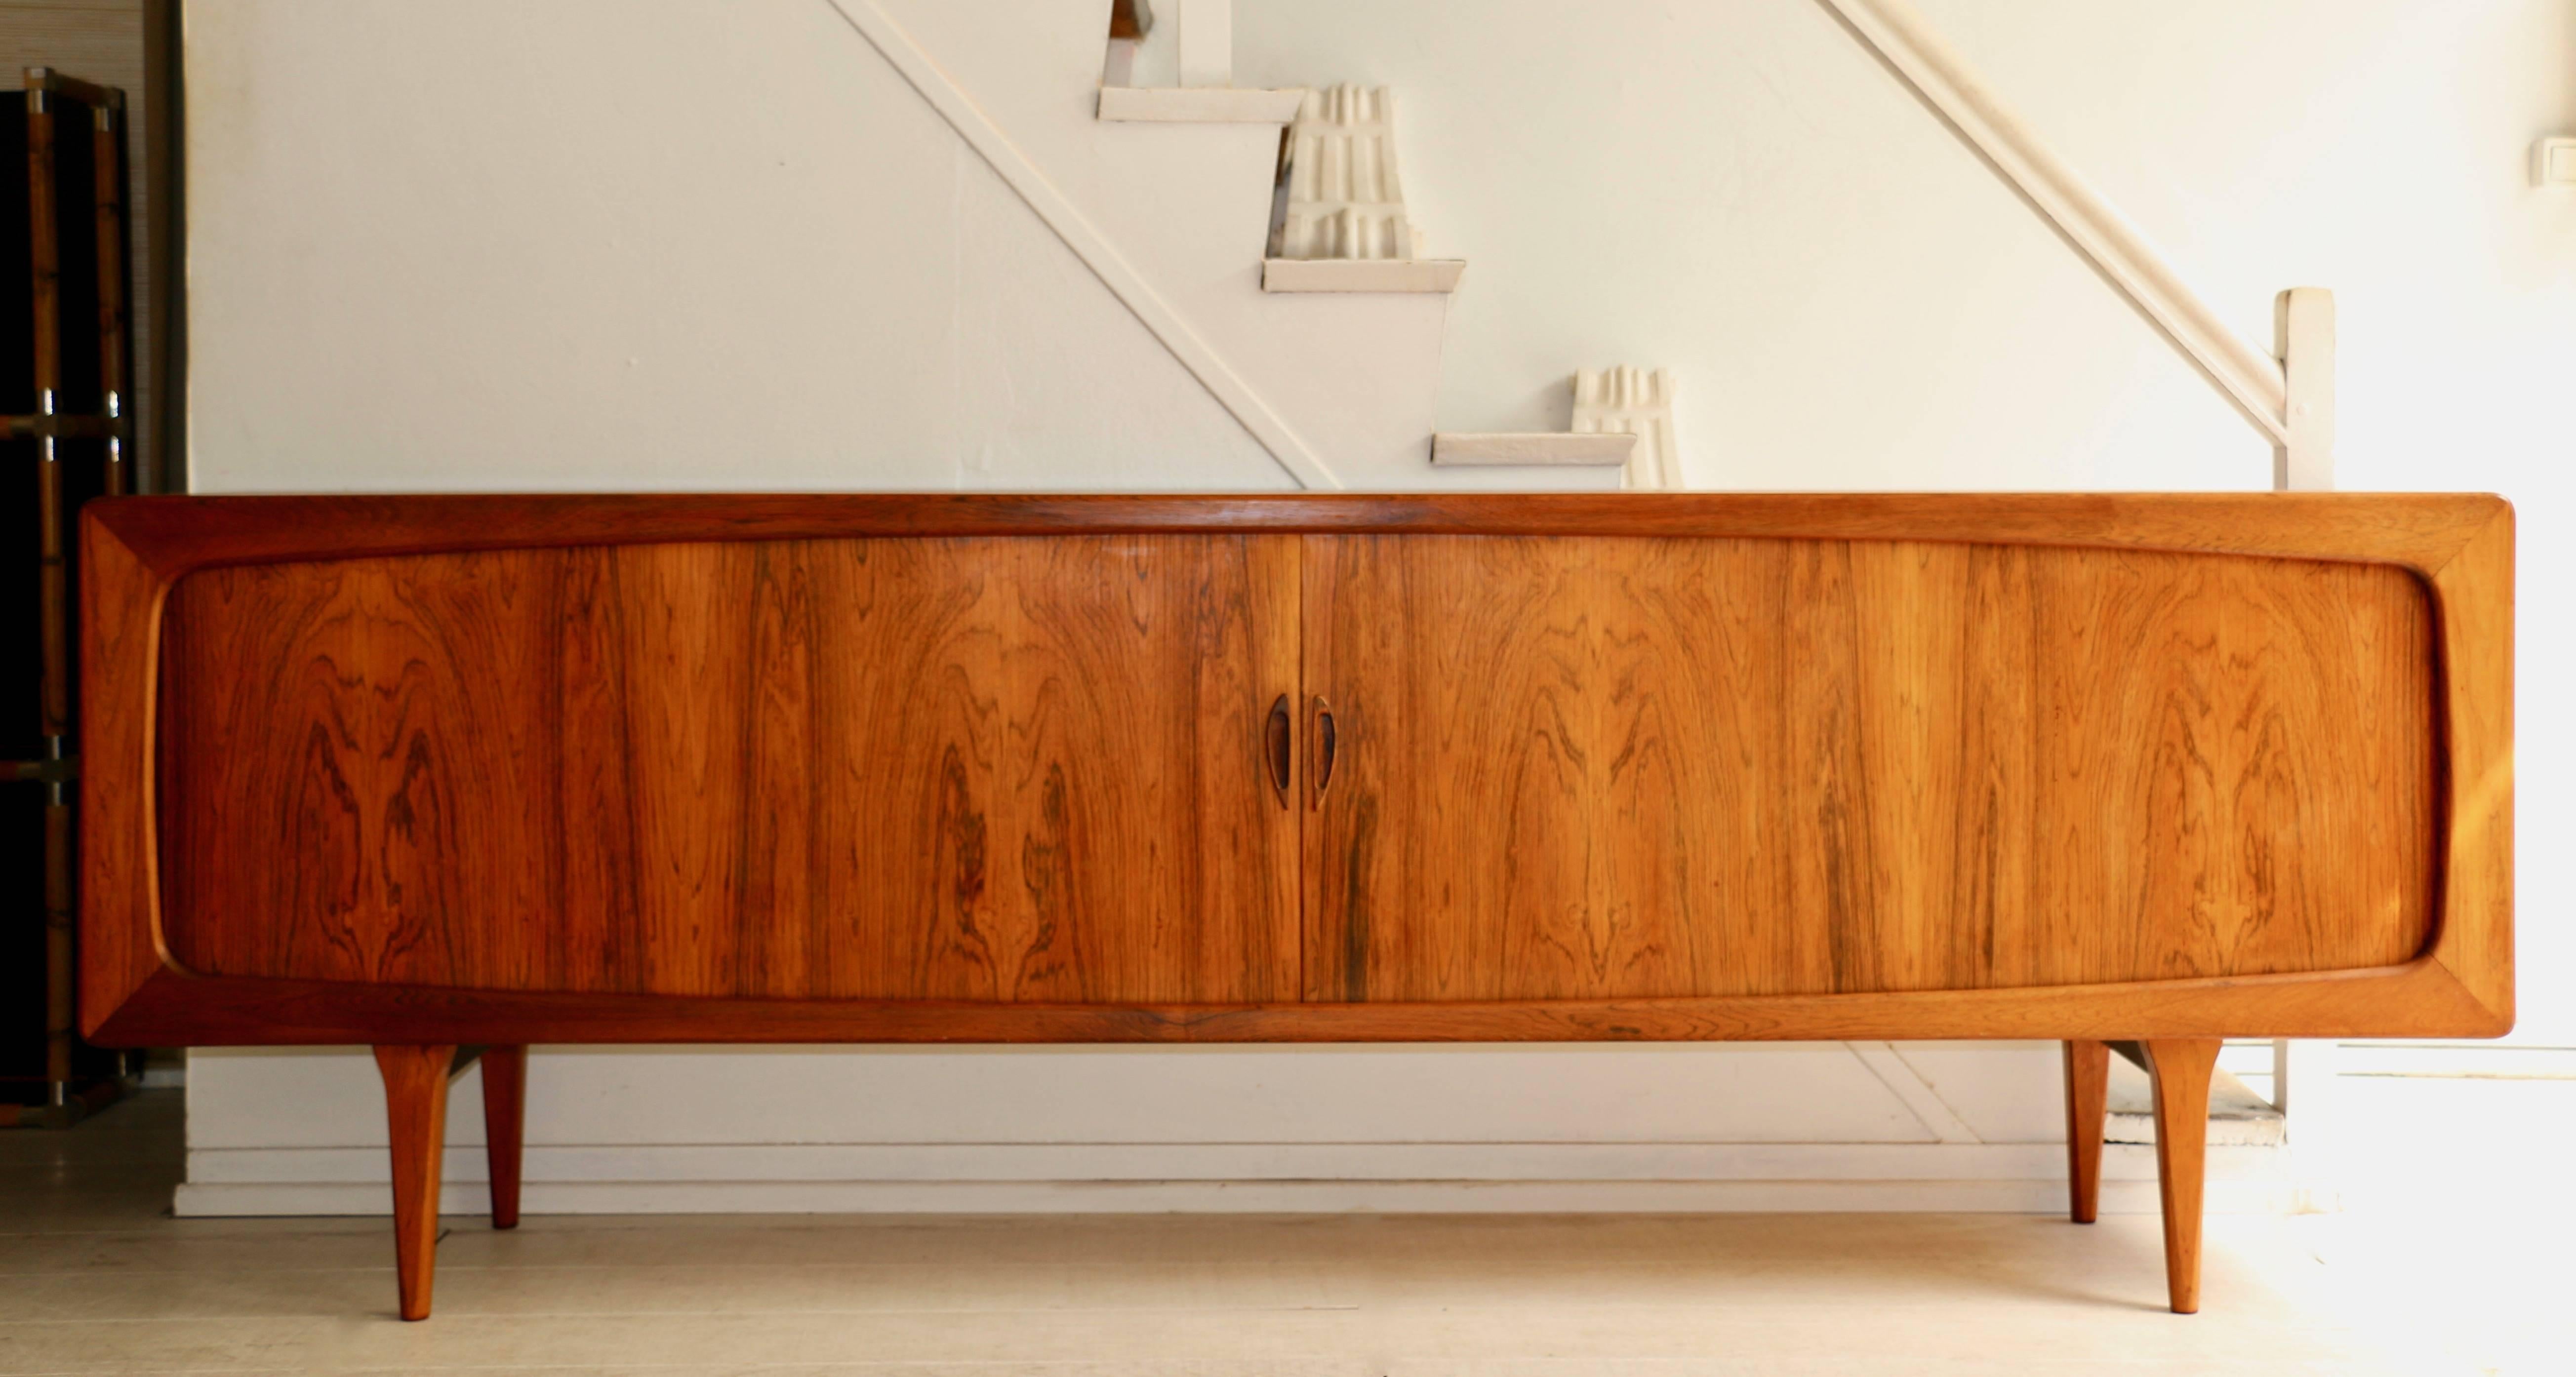 Hans Peter Hansen, circa 1960. Skive Mobemfabrik Edition. Denmark. Large rosewood sideboard with two sliding doors. The mahogany veneer interior is composed of four parts, two shelf parts and two silverware drawer parts.